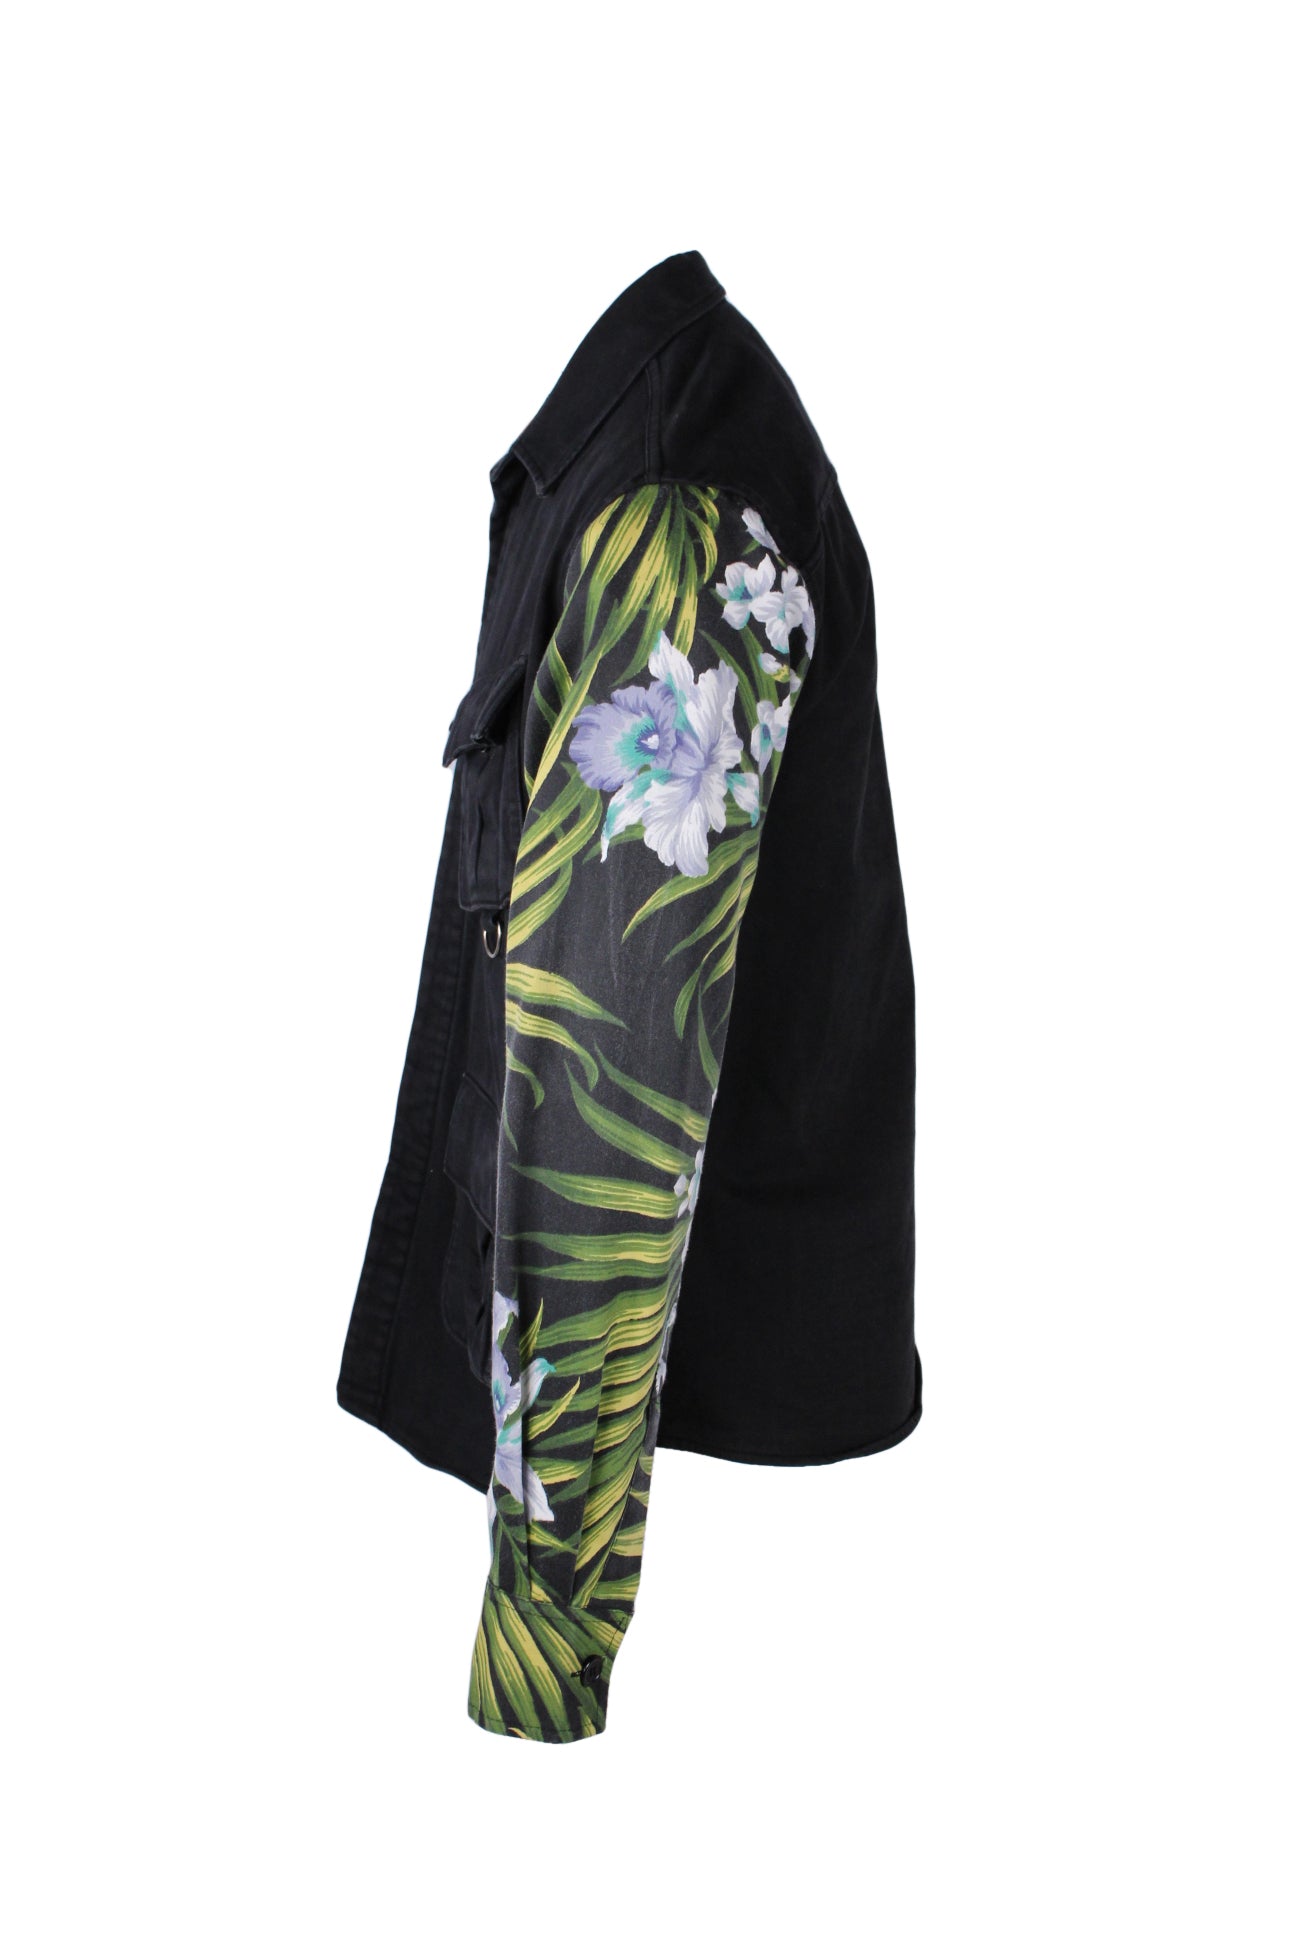 left side view with tropical pattern on sleeve of jacket.